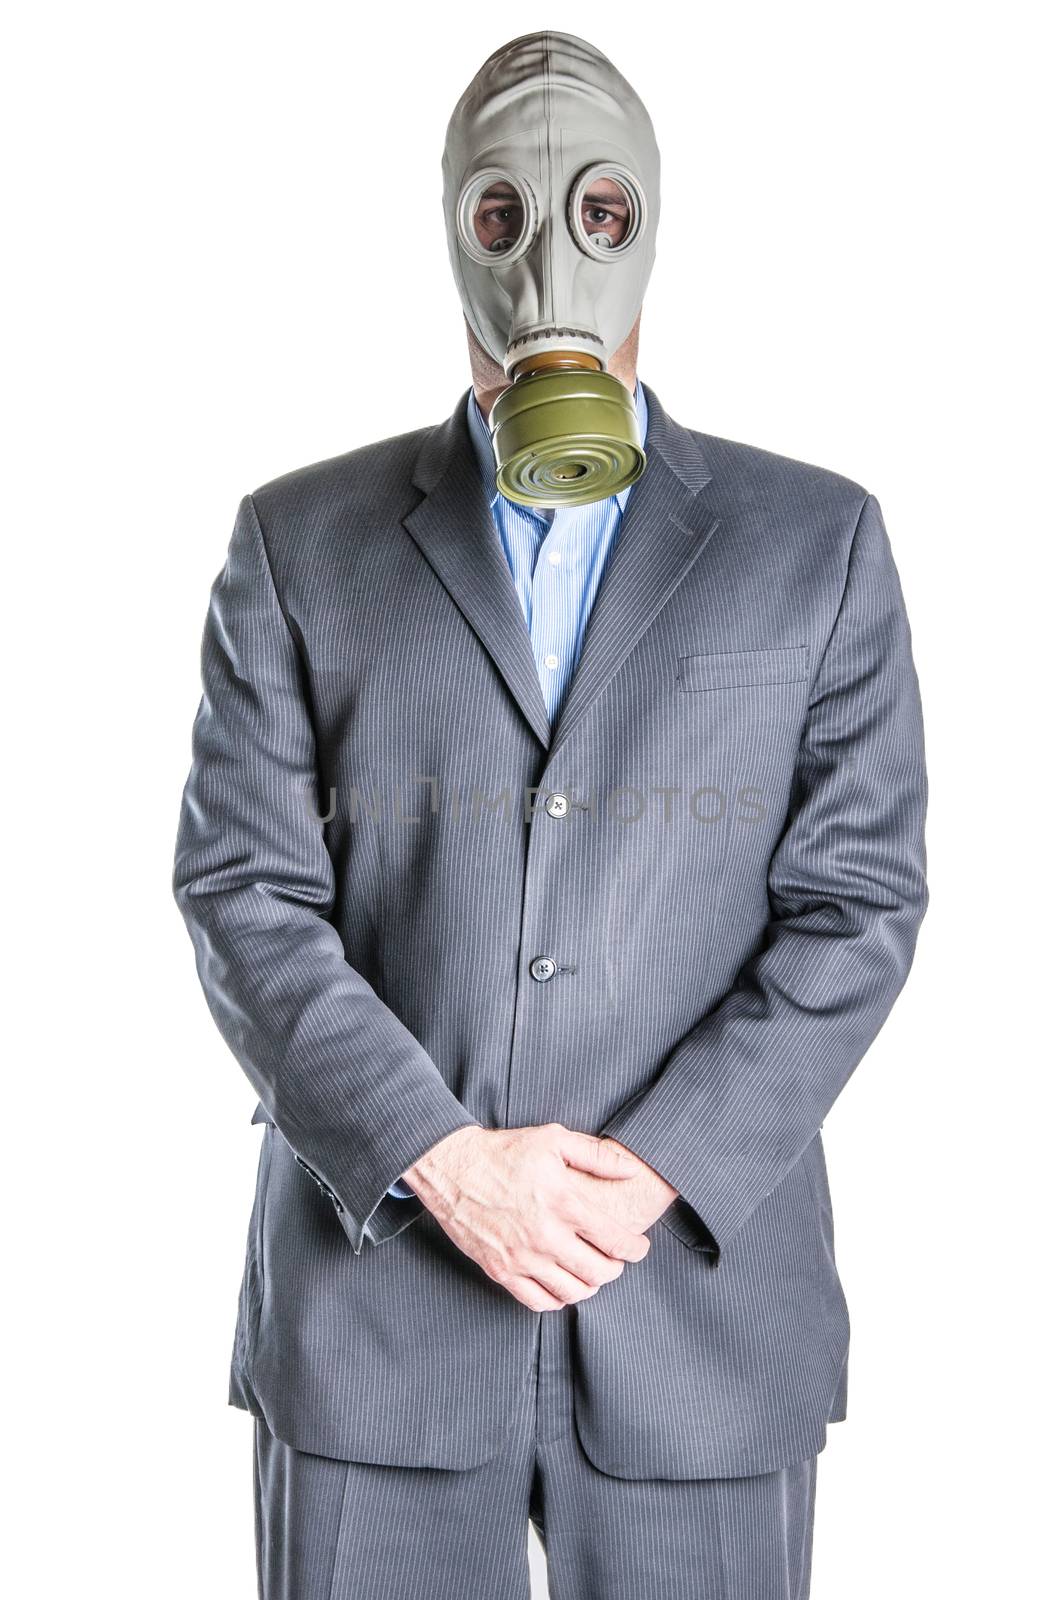 Men wearing a blue business suit and gas mask simbolizing danger in the environment